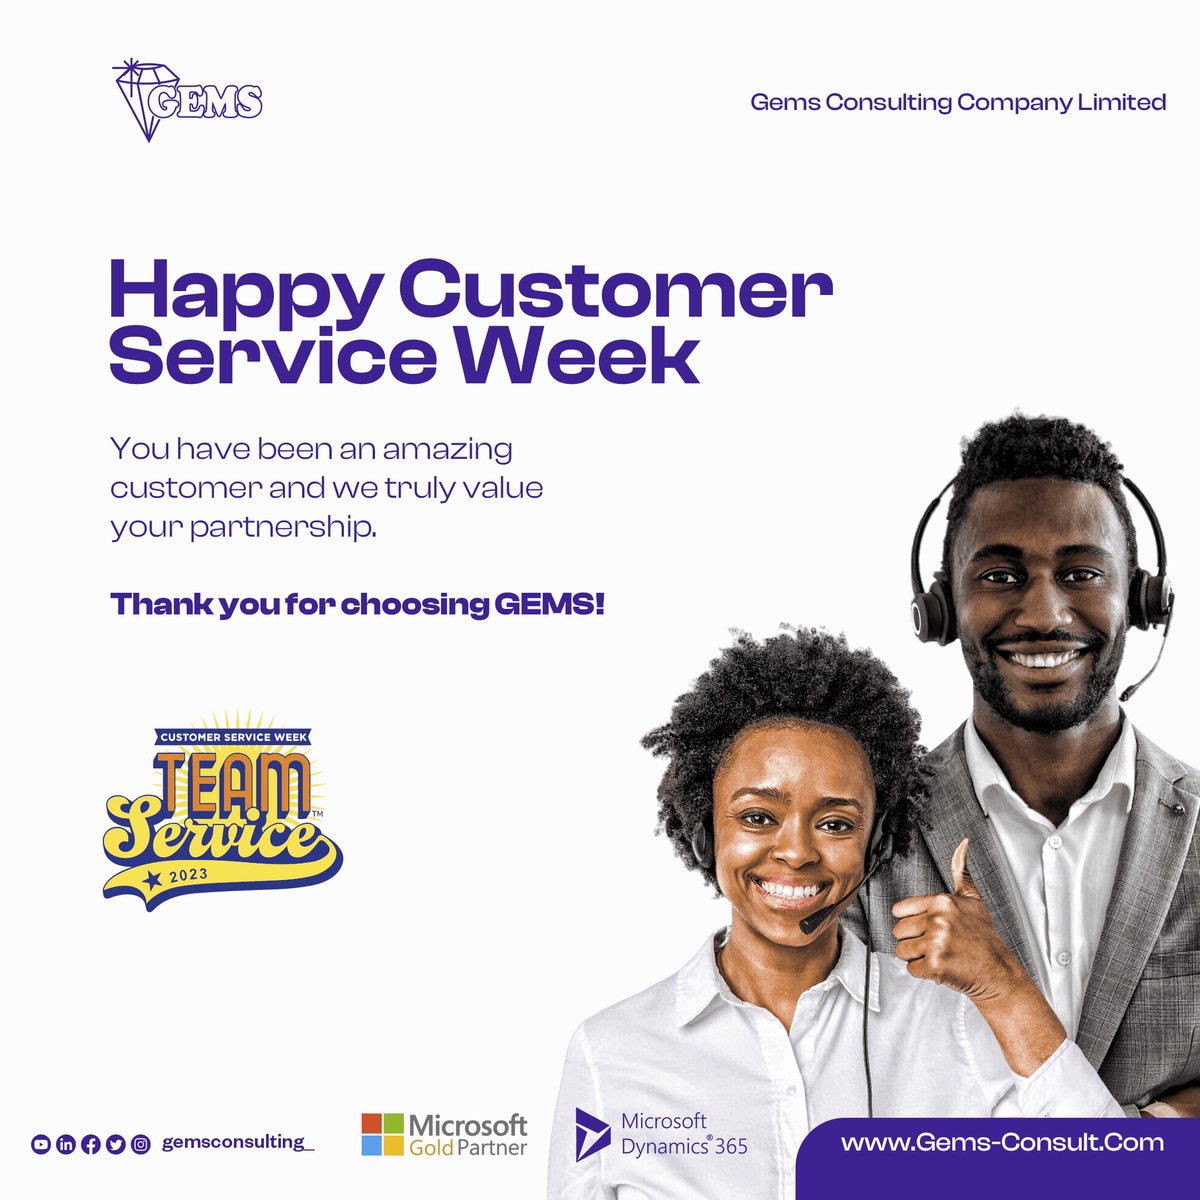 We appreciate you all.

Happy Customer Service Week to all our Clients who are our Gems💎

#CustomerServiceWeek2023 #gemsconsulting #gems #customersfirst #gratitude #appreciation